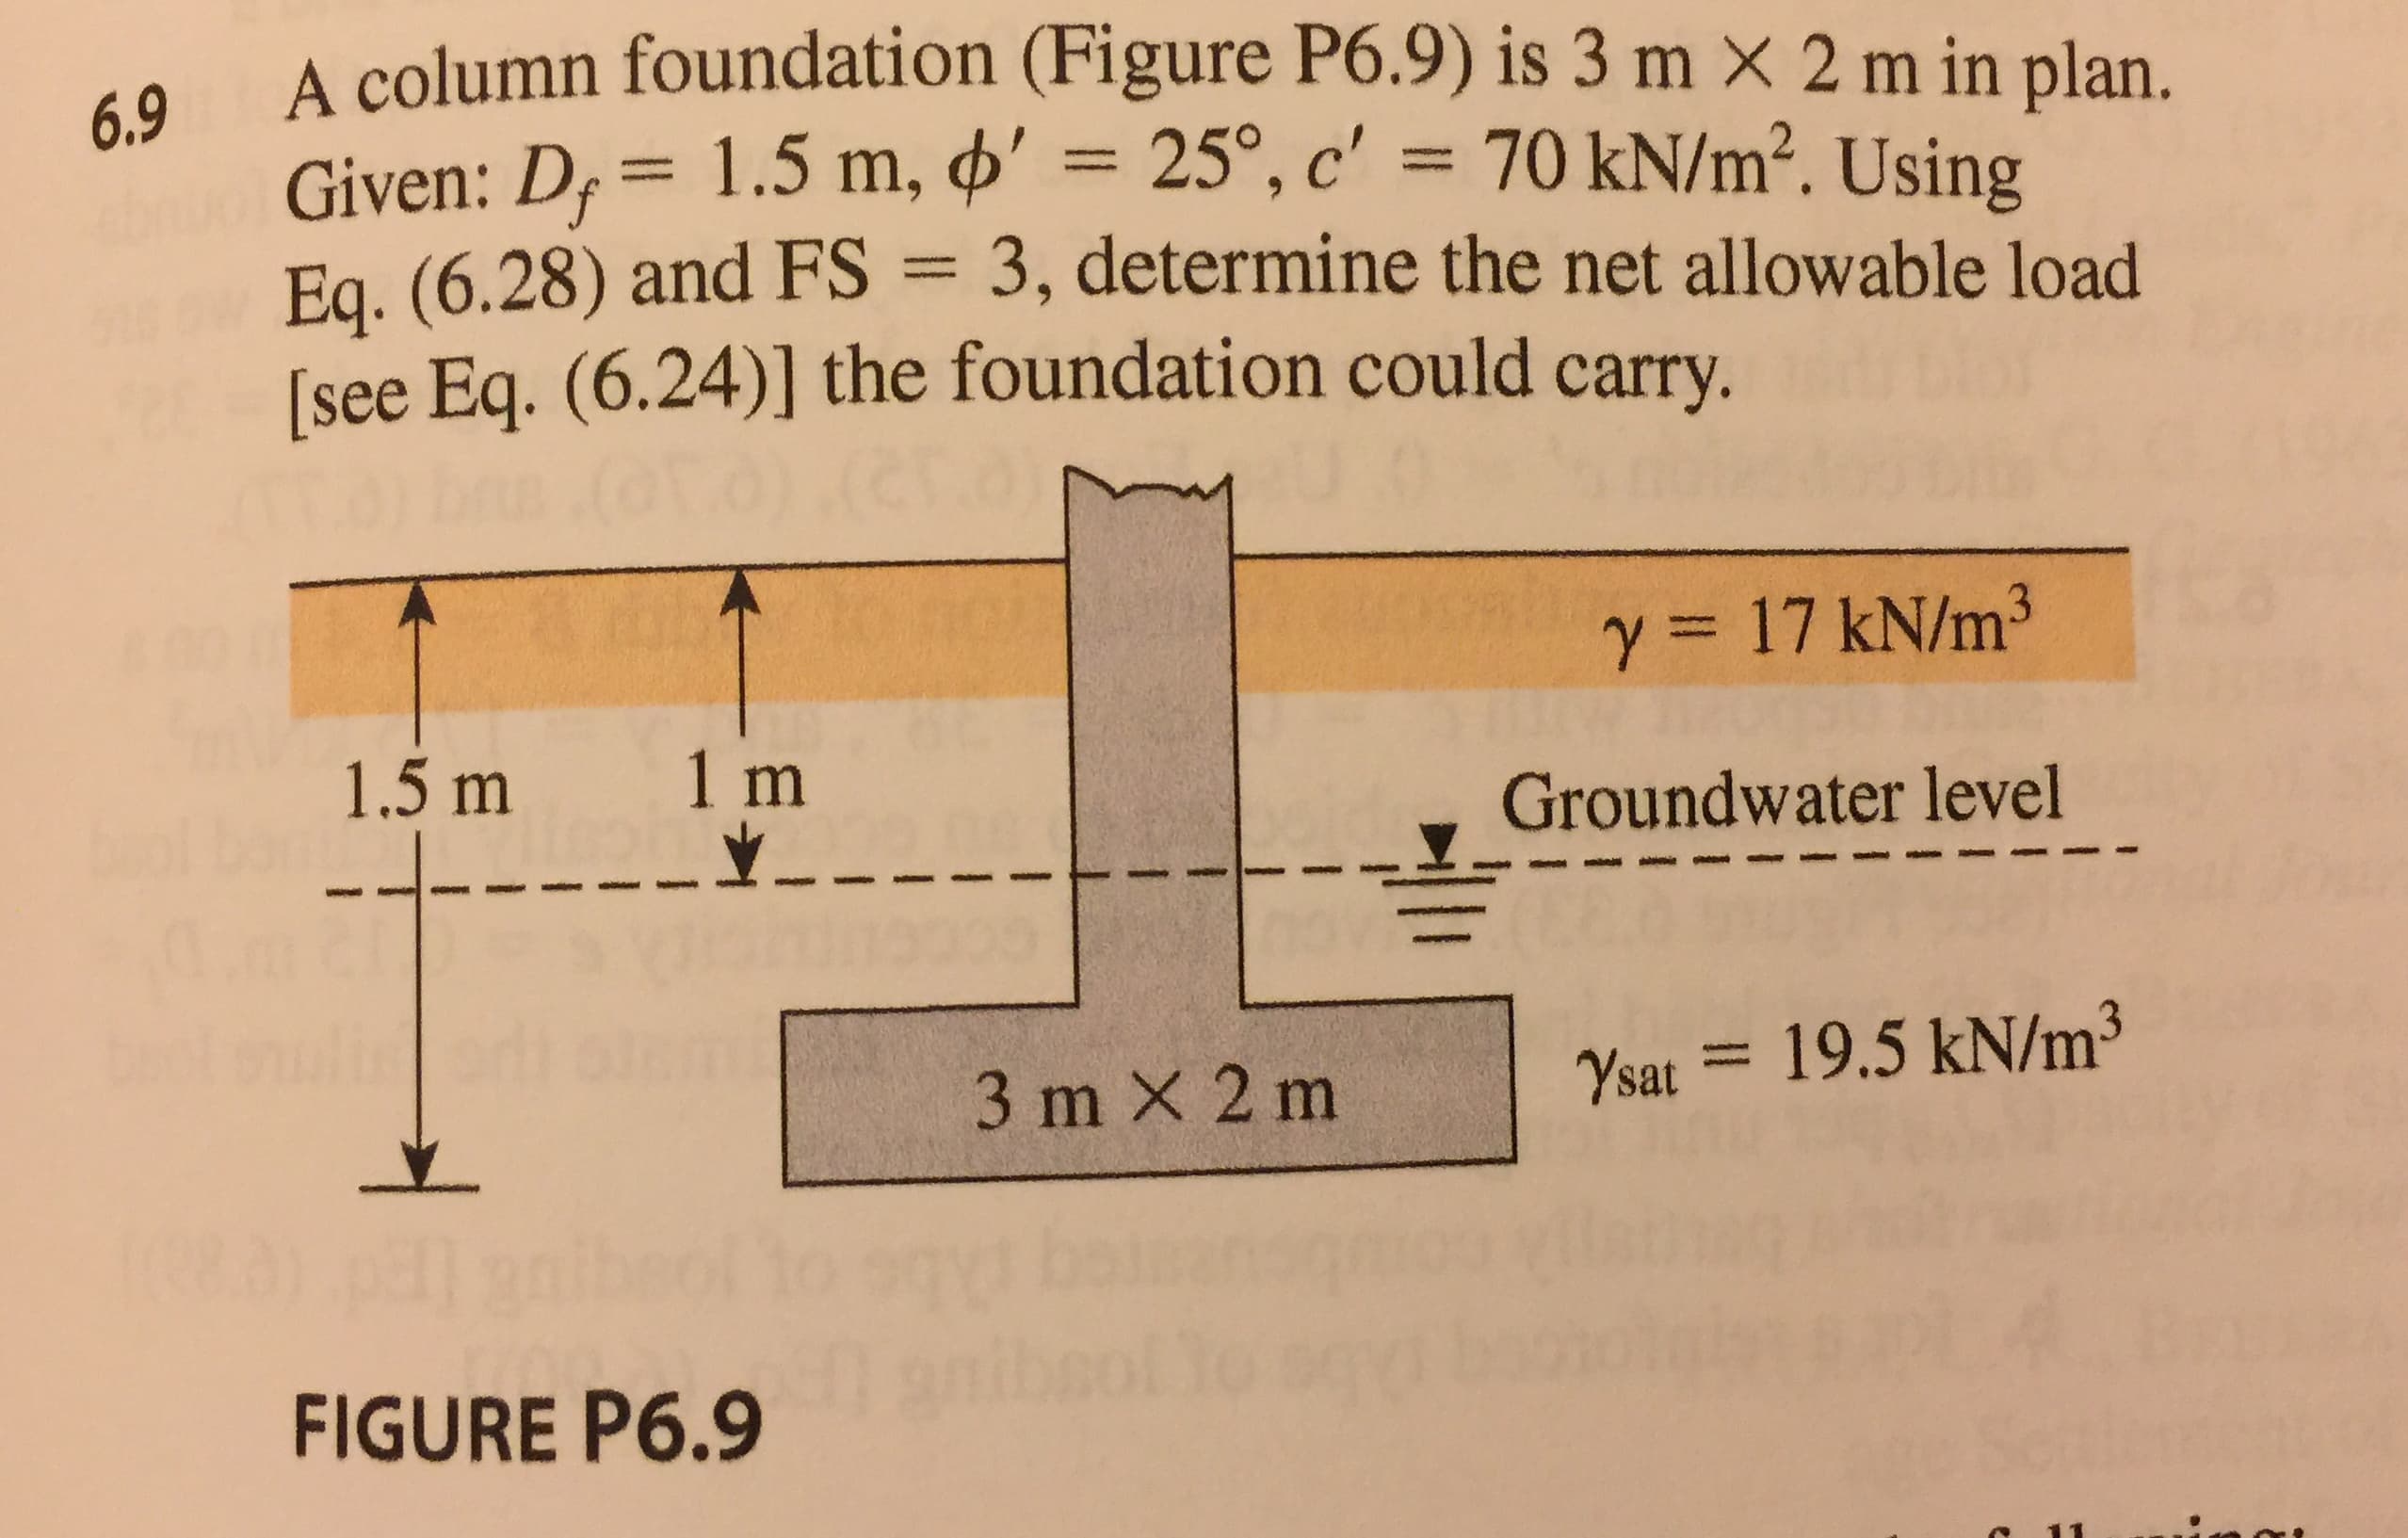 A column foundation (Figure P6.9) is 3 m X 2 m in plan.
Given: D,-1.5 m, ф, 25°, c,-70 kN/m2. Using
Ea. (6.28) and FS 3, determine the net allowable load
[see Eq. (6.24)] the foundation could carry.
6.9
γ = 17 kN/m3
1.5 m
1 m
Groundwater level
|
7sat-= 19.5 kN/m3
3 m × 2 m
FIGURE P6.9
